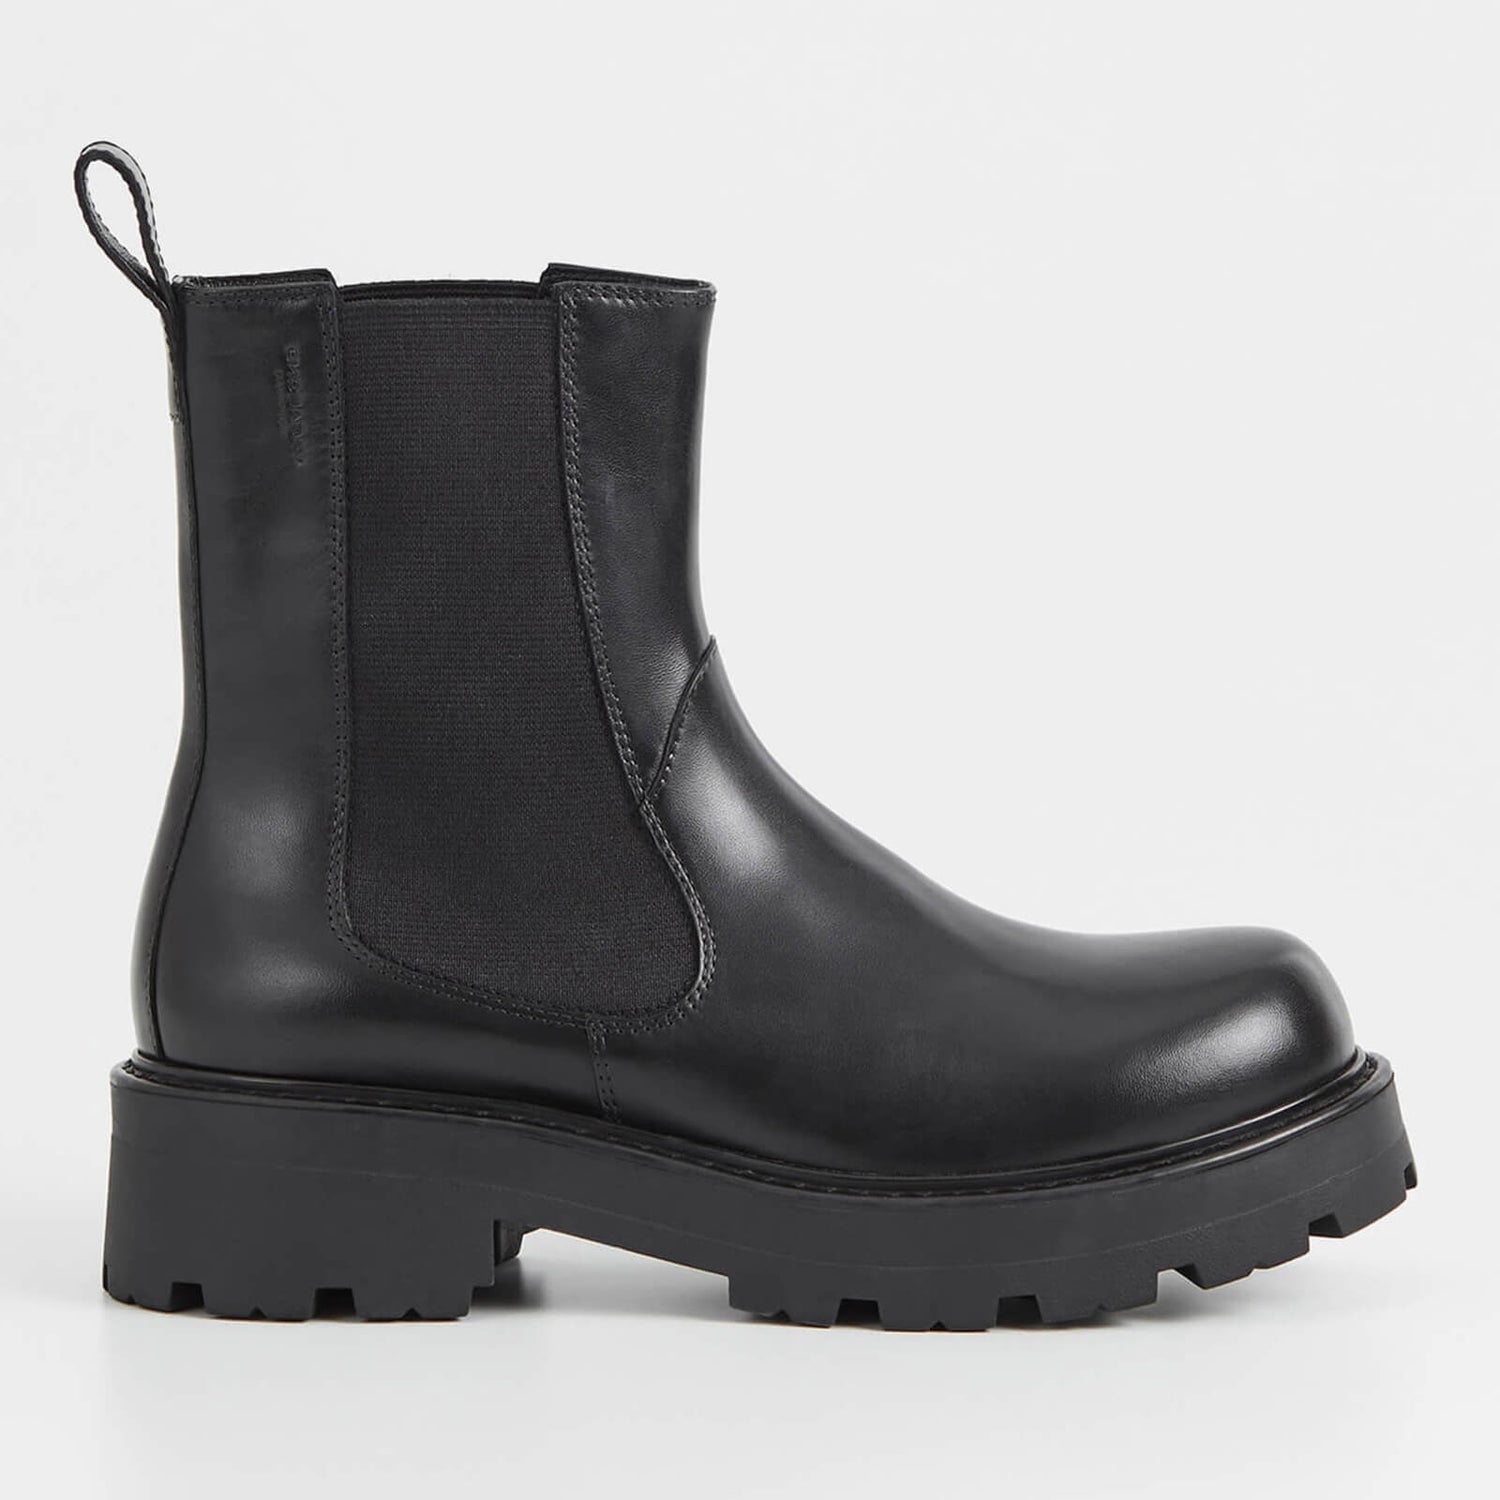 Vagabond Cosmo 2.0 Leather Ankle Chelsea Boots - UK 4